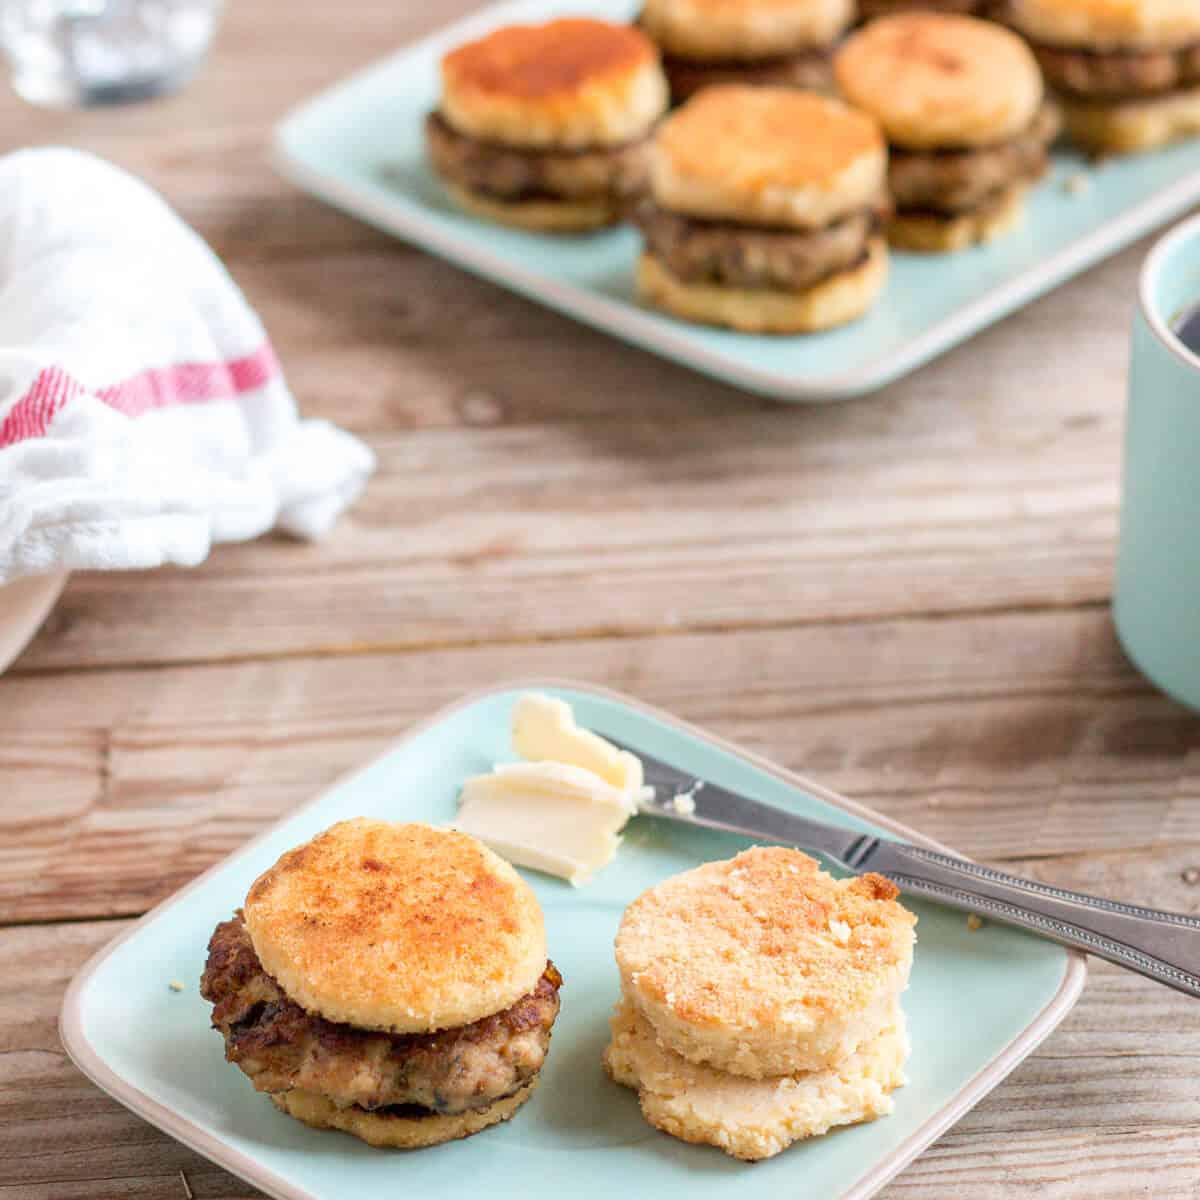 https://thethingswellmake.com/wp-content/uploads/2013/07/17-no-wm-how-to-make-sausage-patties-and-homemade-sausage-biscuits-8.jpg